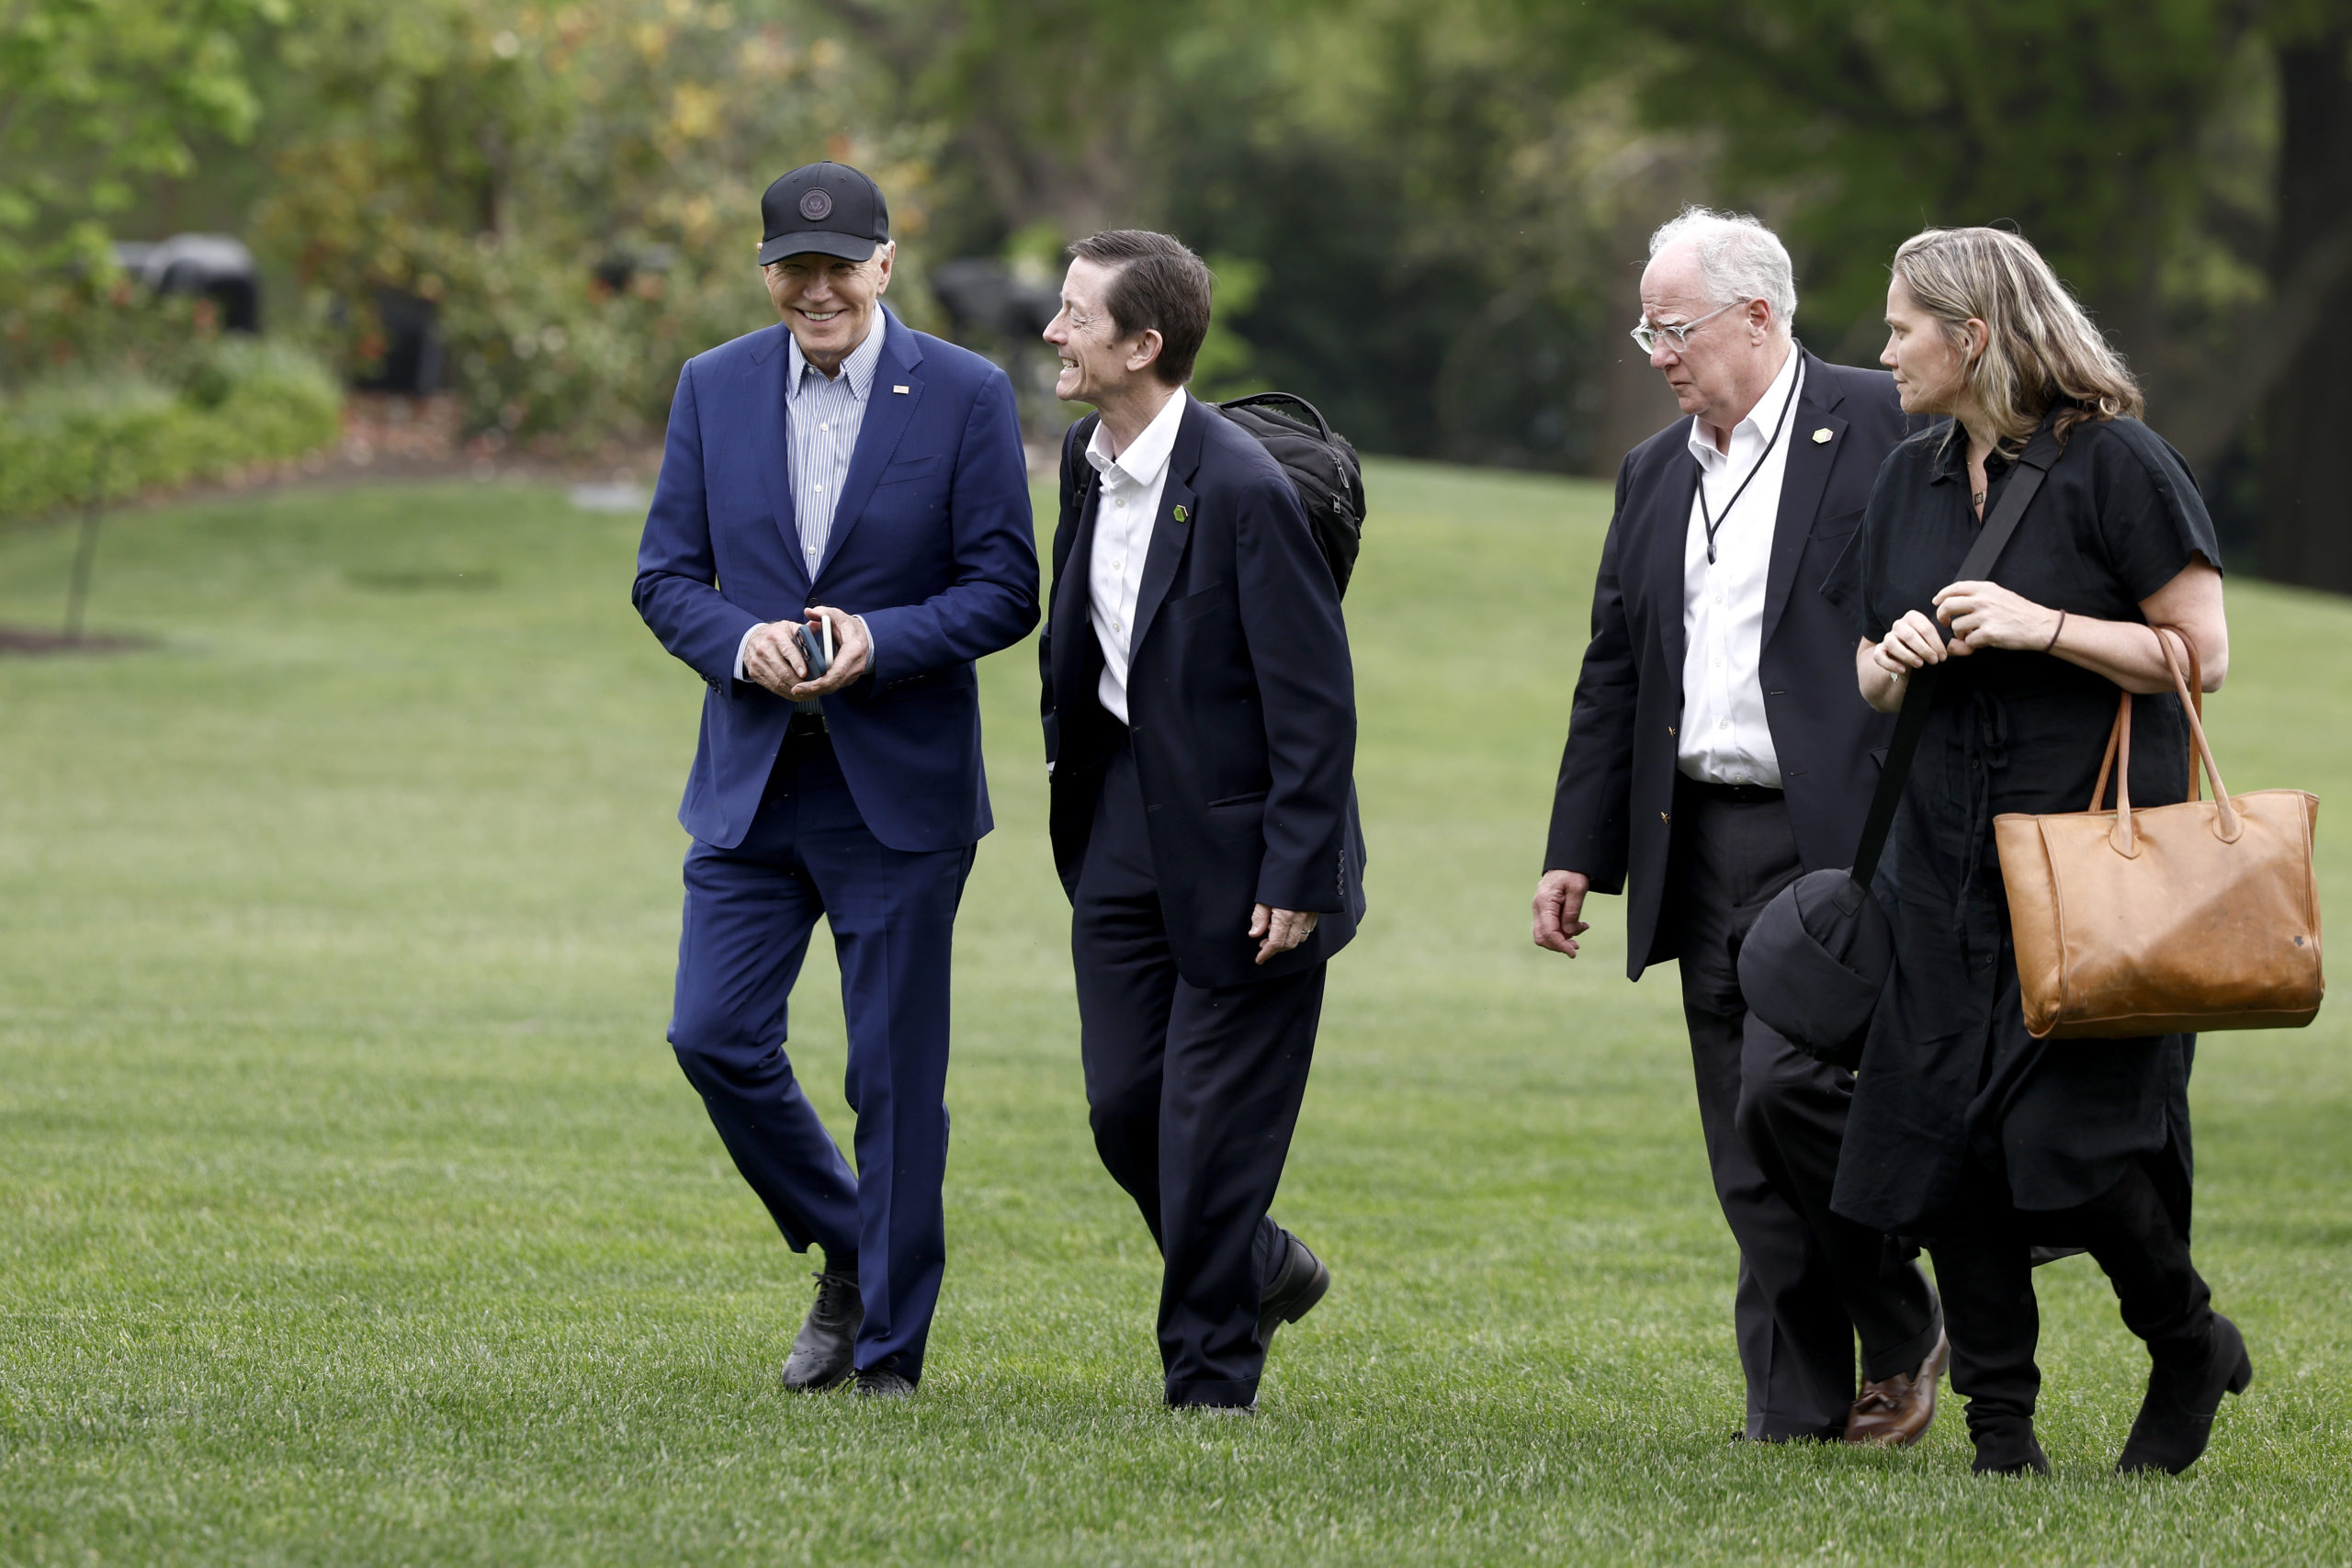 U.S. President Joe Biden walks to the White House with senior members of his staff, including Bruce Reed, assistant to the president and deputy chief of staff; Mike Donilon, senior advisor; and Deputy Chief of Staff Annie Tomasini, after landing on the South Lawn in Marine One on April 17, 2024 in Washington, DC. Biden spent the night in the Pittsburgh area, delivering remarks at the United Steel Workers headquarters. (Photo by Anna Moneymaker/Getty Images)